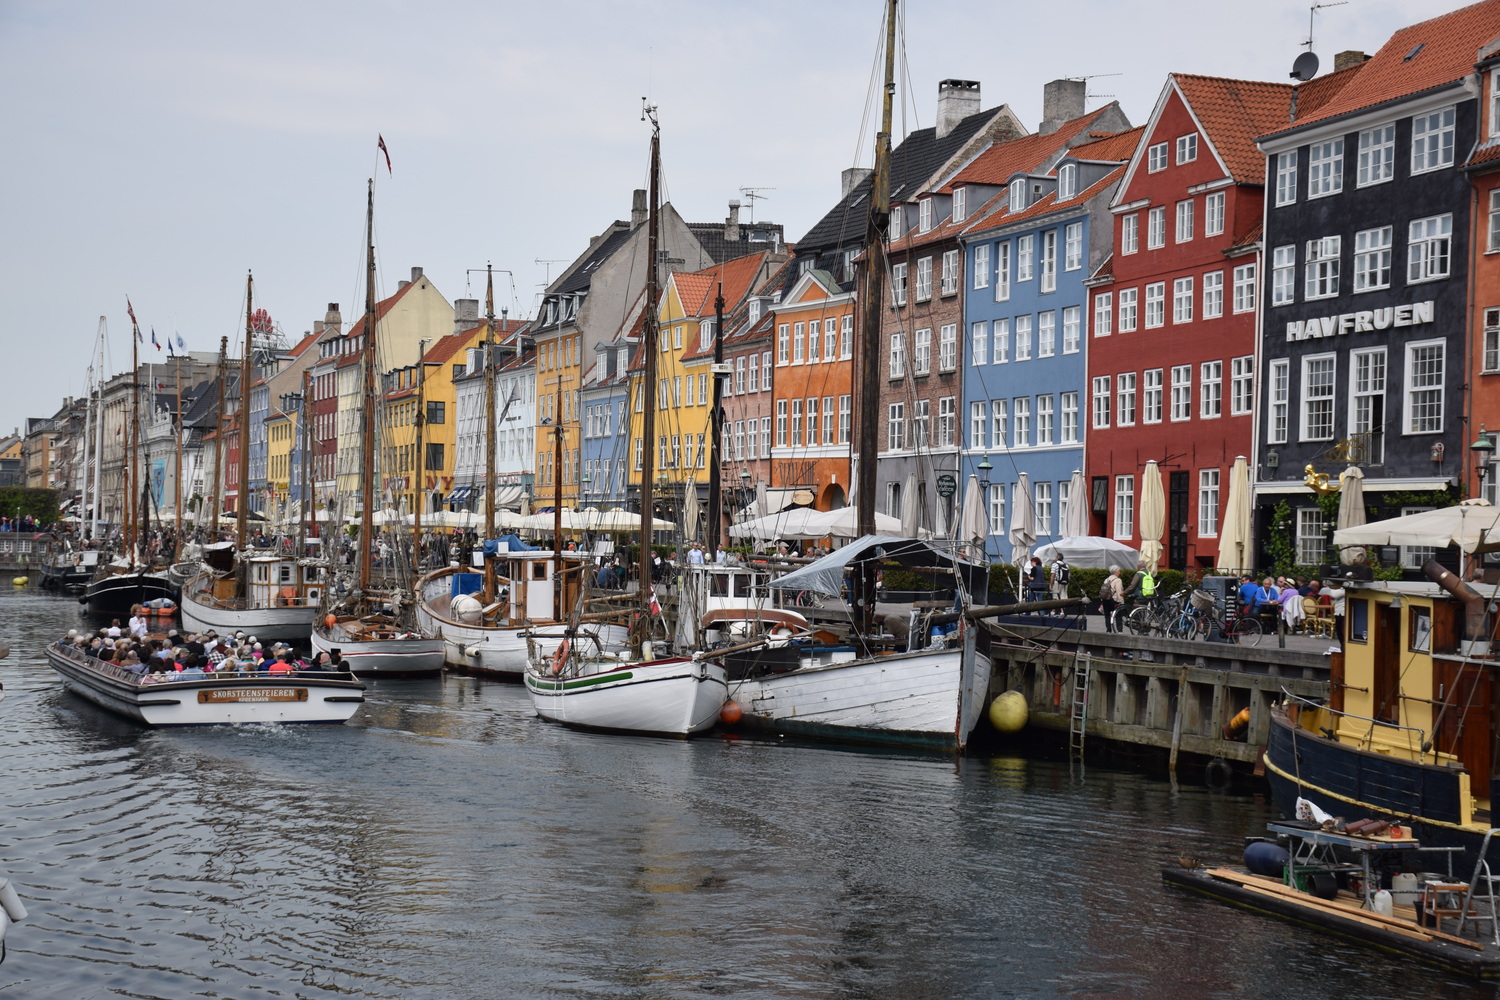 This guide will help you make the most out of your three days in Copenhagen. It features tips before you go, where to stay, things to do, and where to eat!